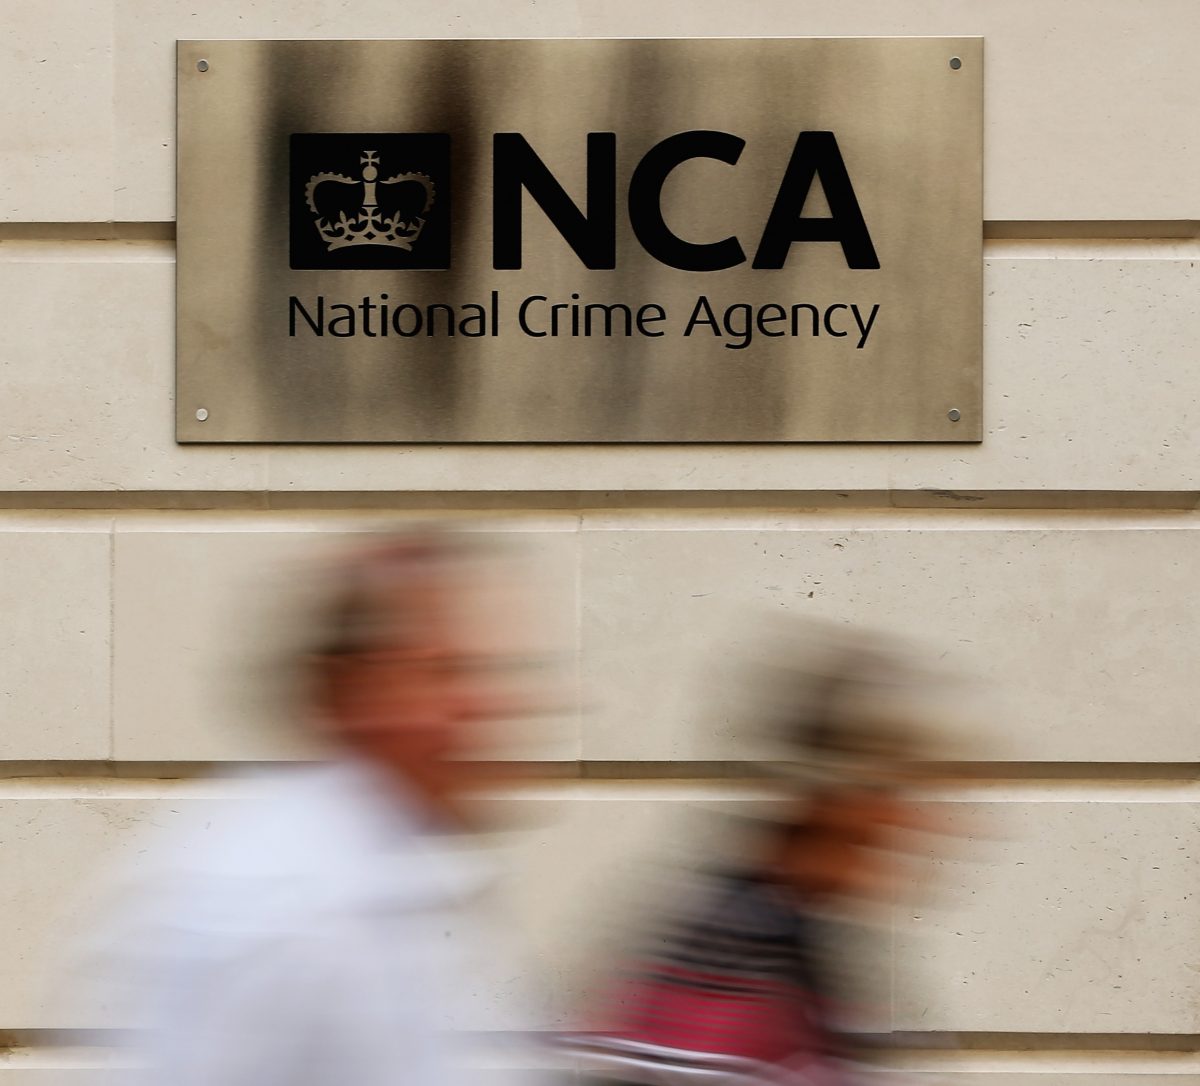 The National Crime Agency building